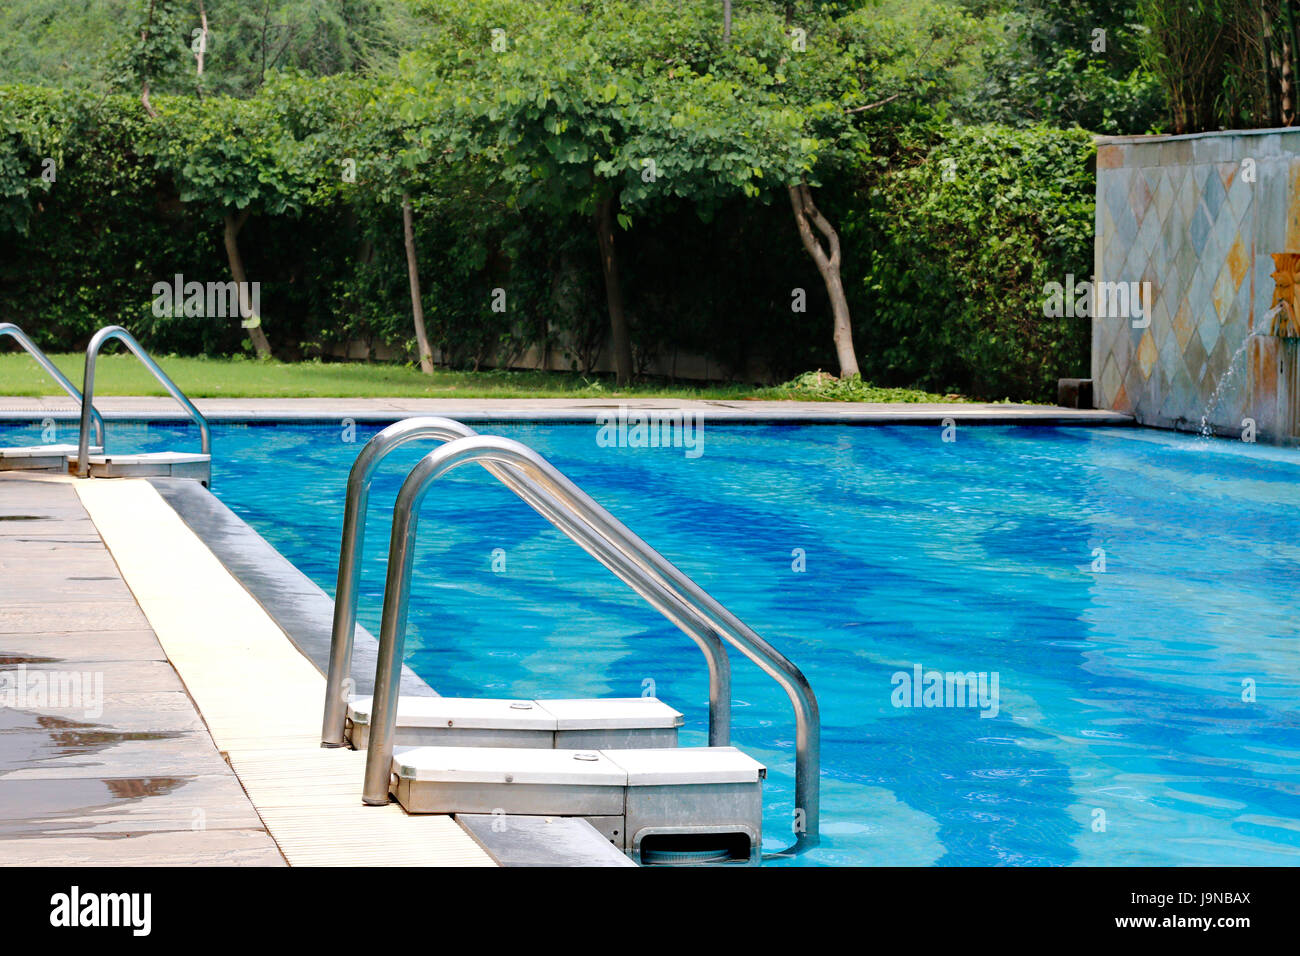 side view of a swimming pool with grass in background Stock Photo